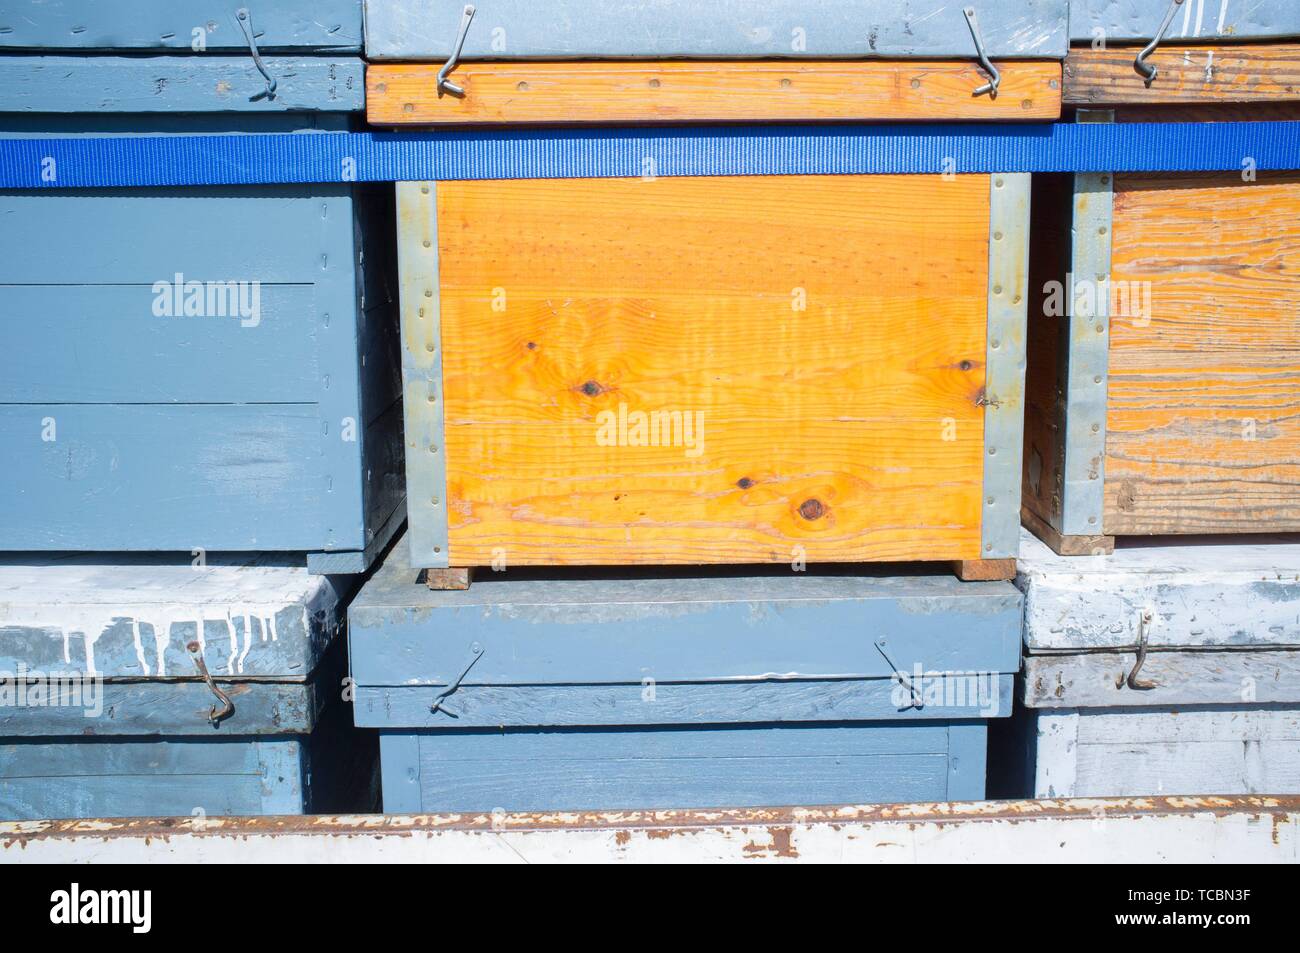 Trailer load with wooden hives ready to move. Beekeepers periodically moves their hives to get better flower fields. Stock Photo